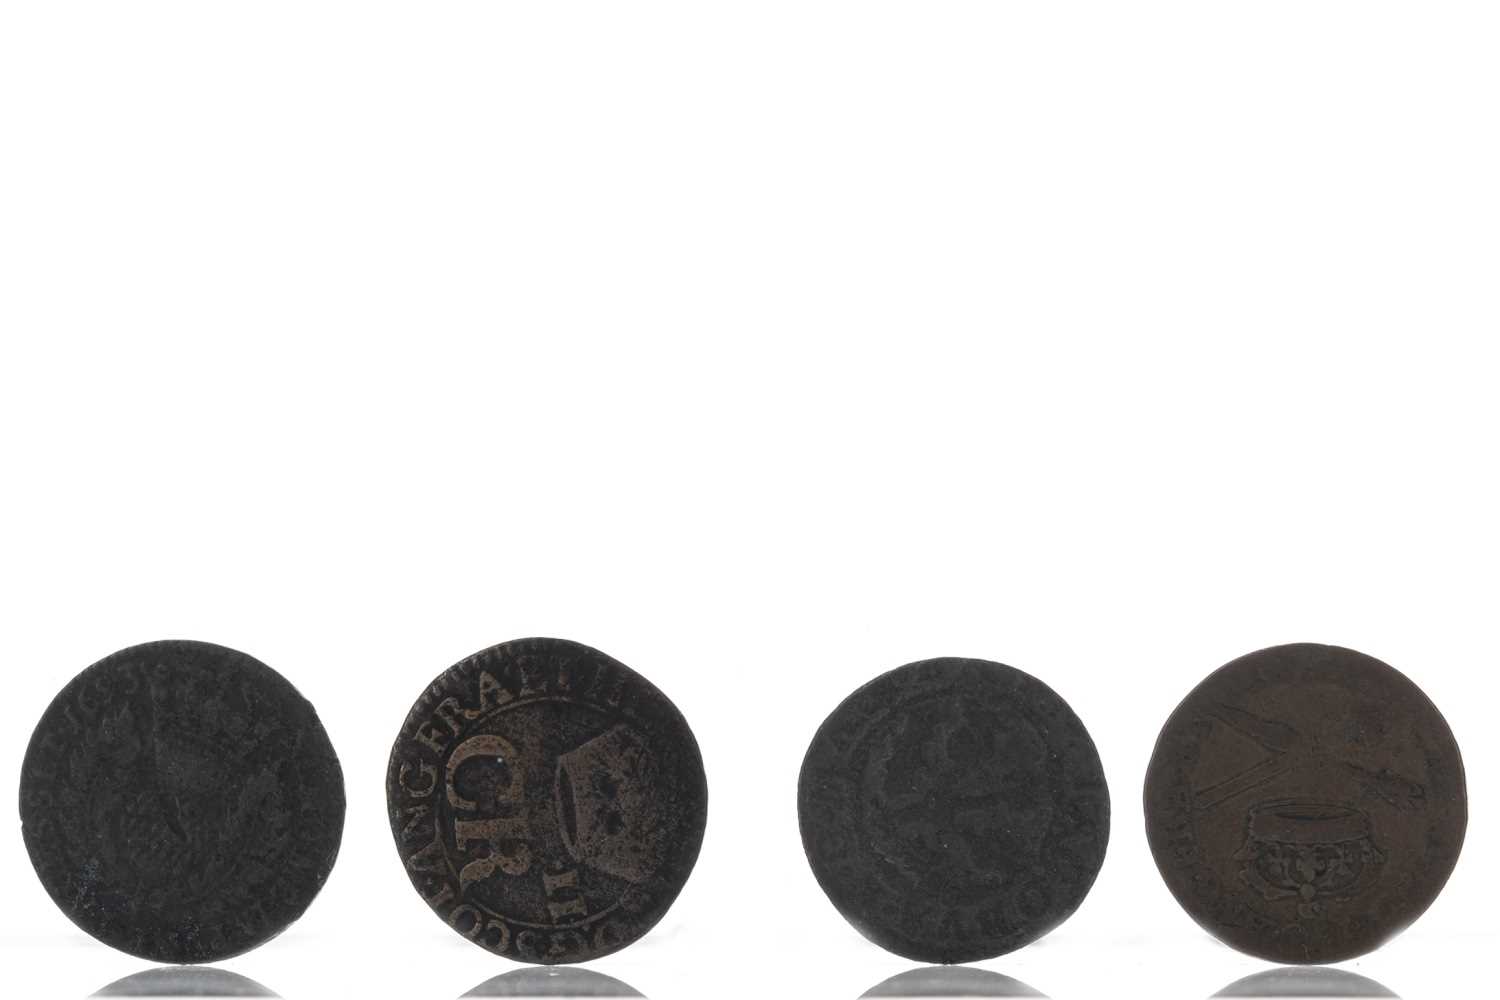 Lot 102 - SCOTLAND - COLLECTION OF BODLE OR TURNER COINAGE